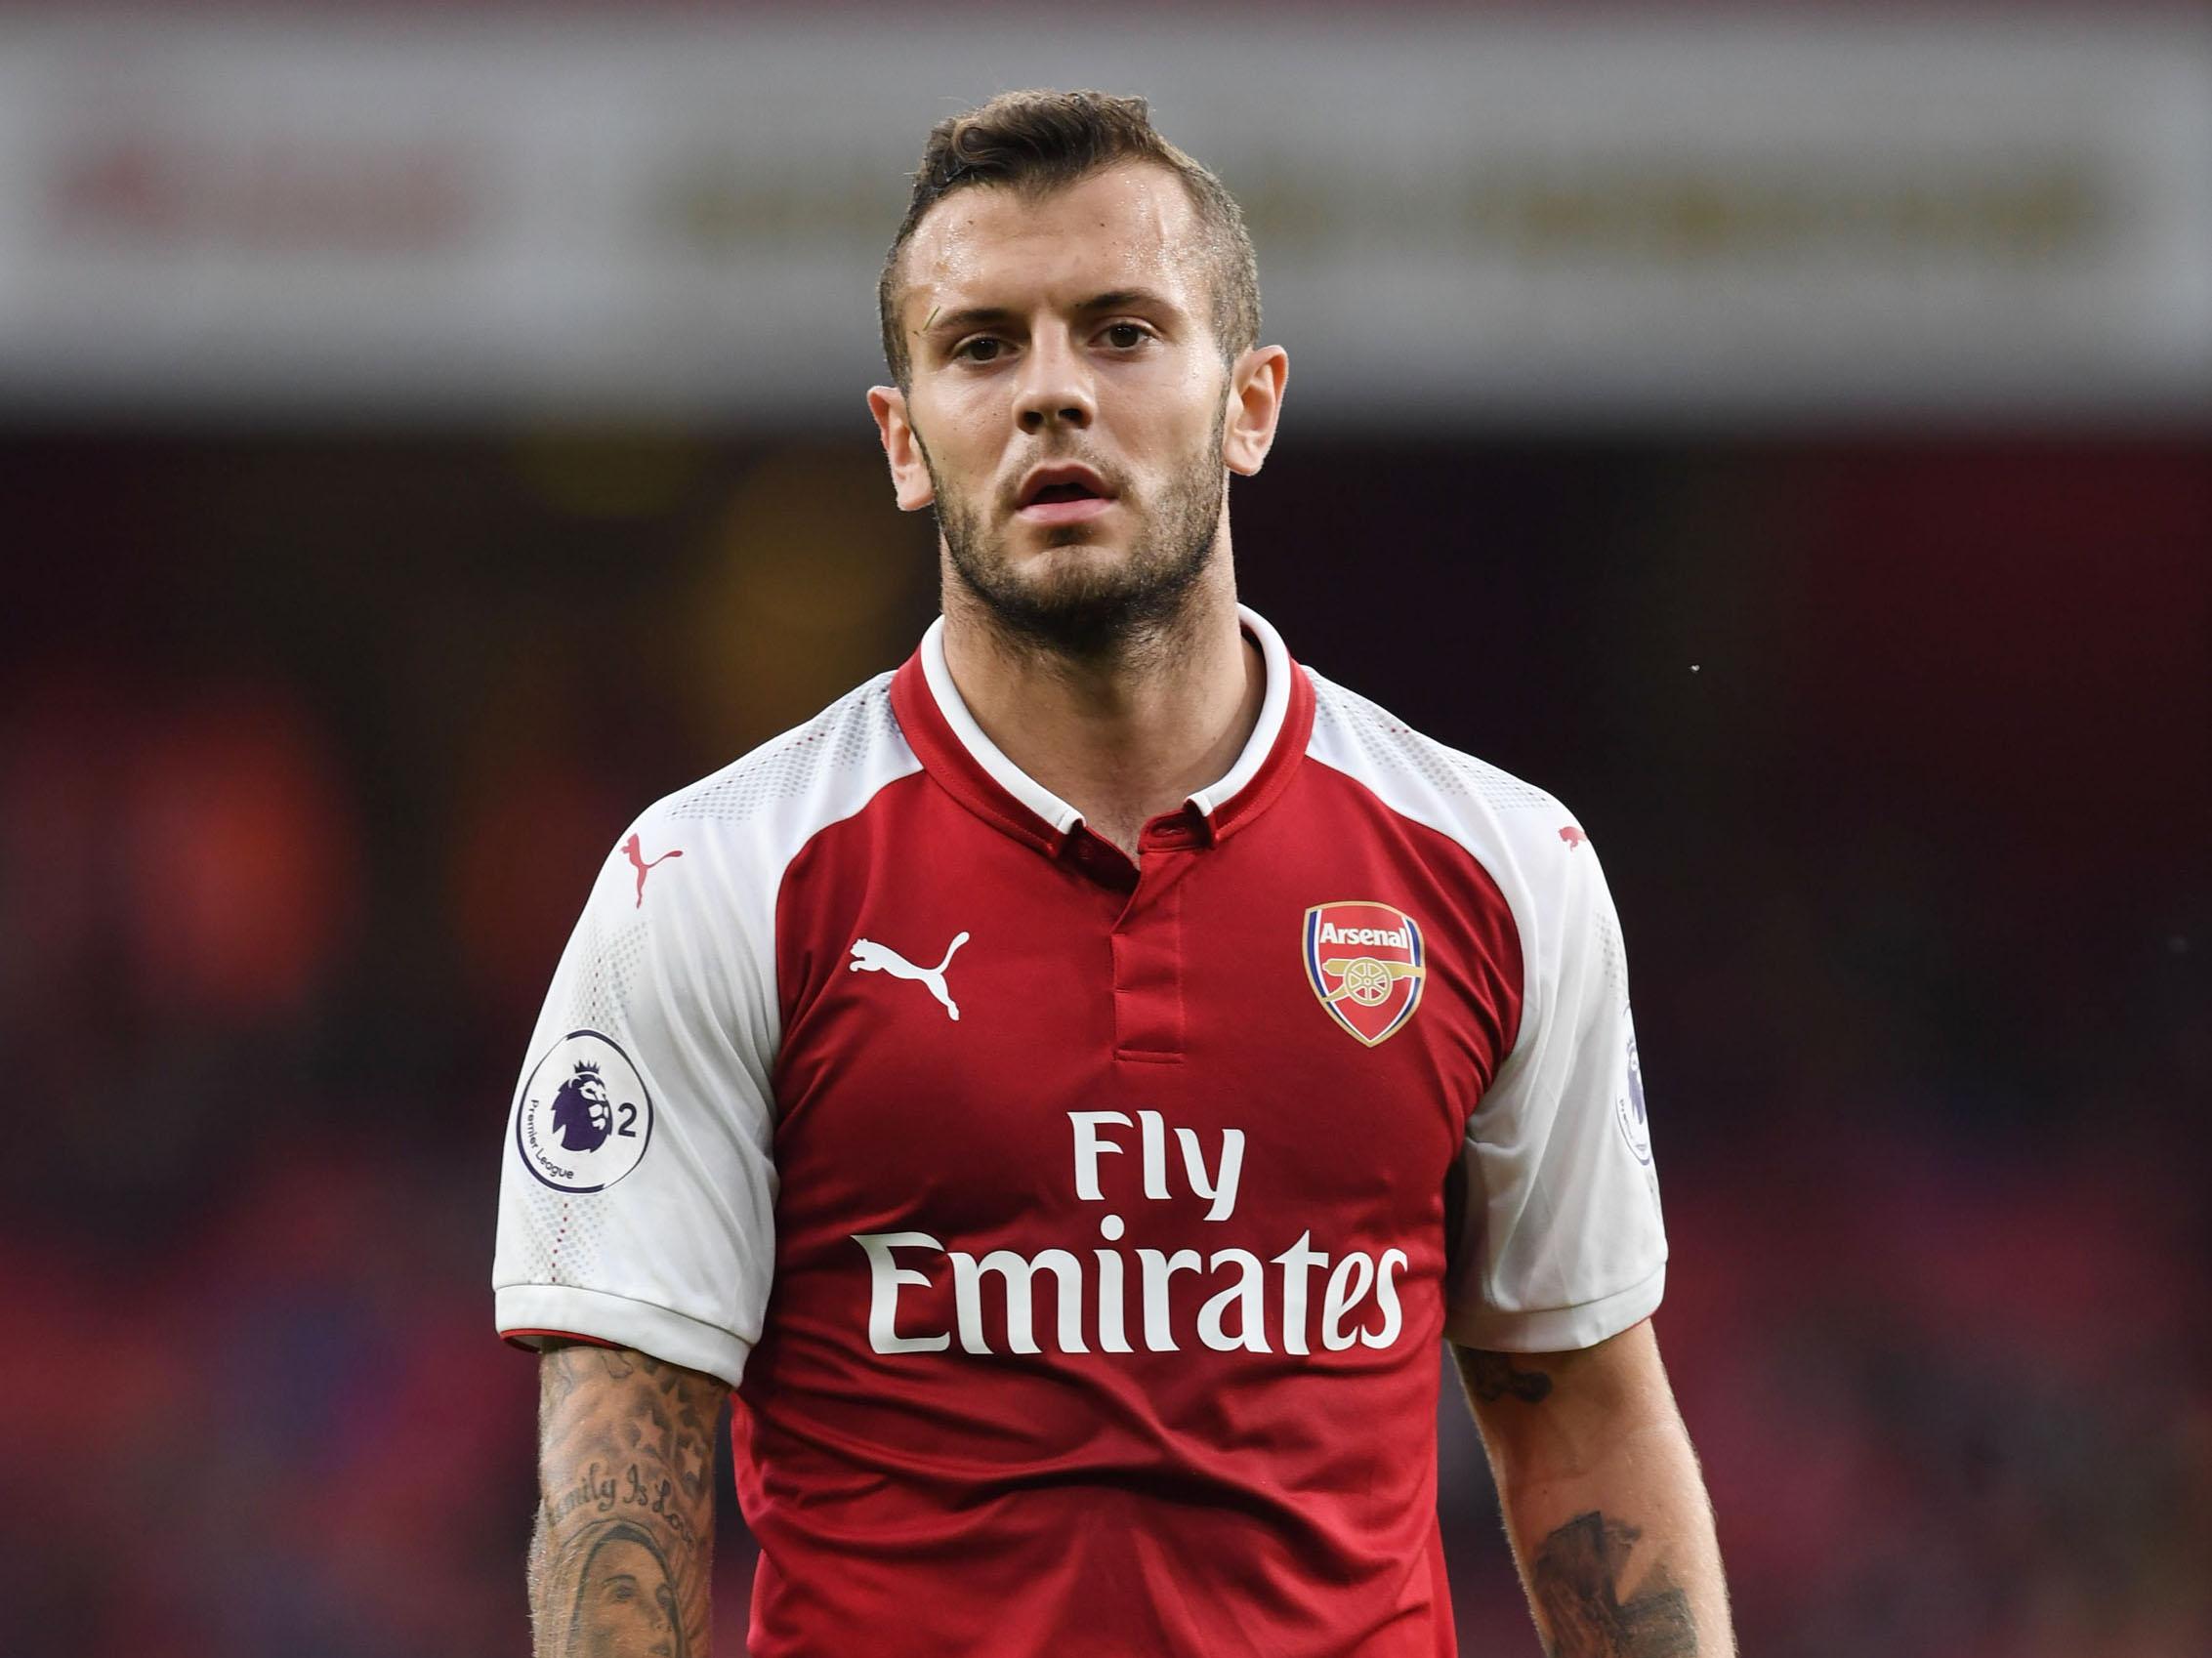 Jack Wilshere has fallen out of favour at Arsenal and spent last season on loan at Bournemouth